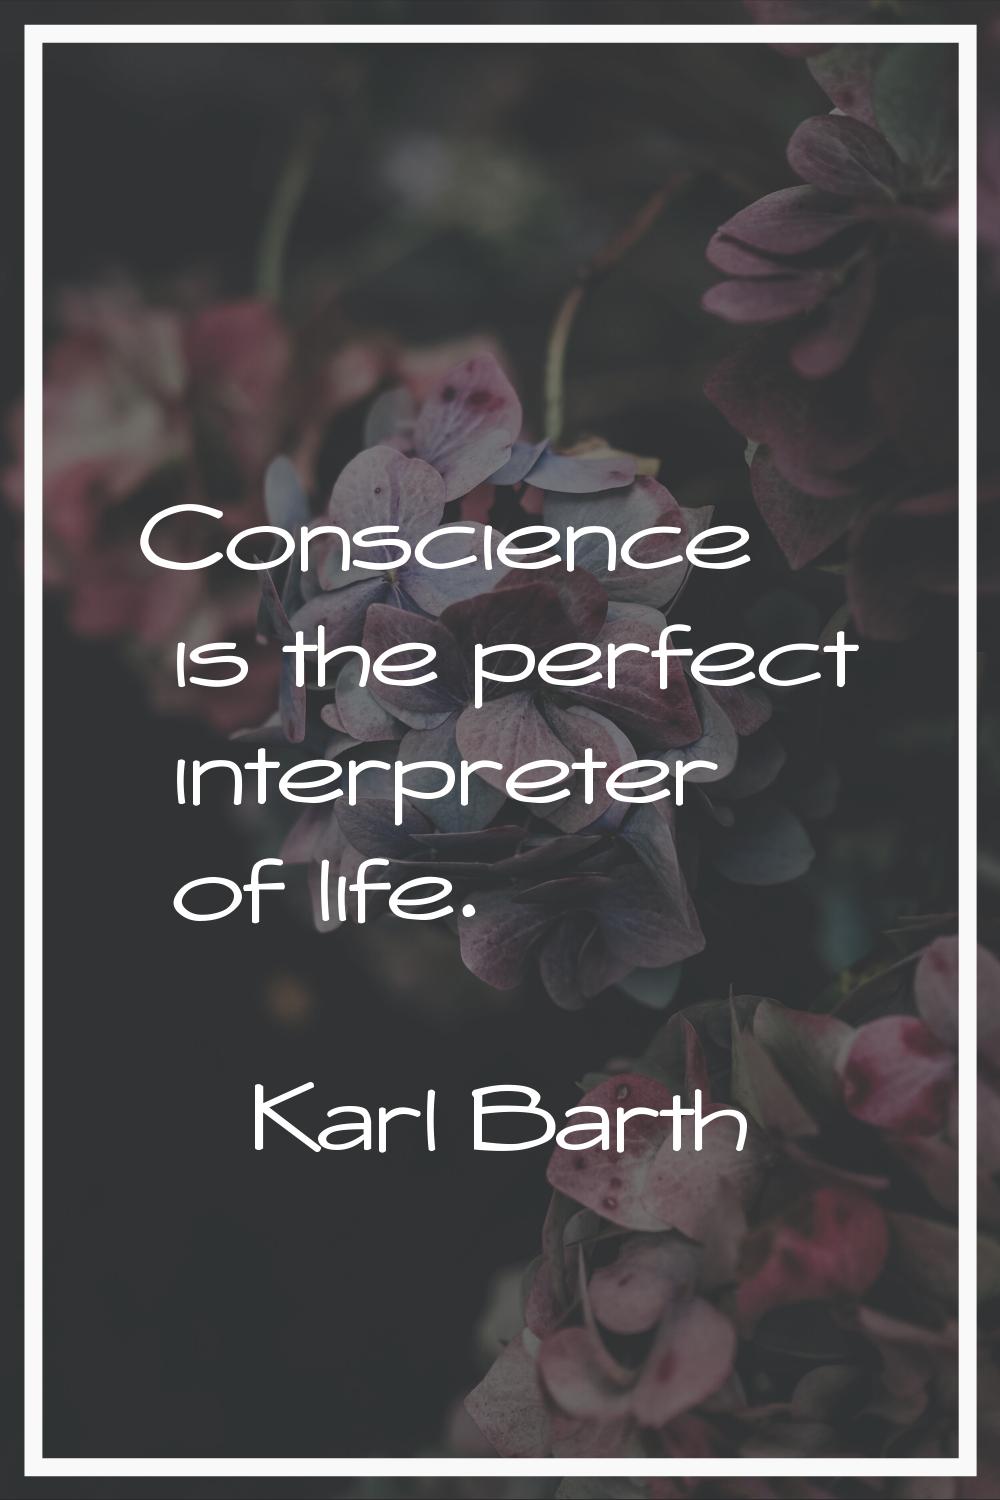 Conscience is the perfect interpreter of life.